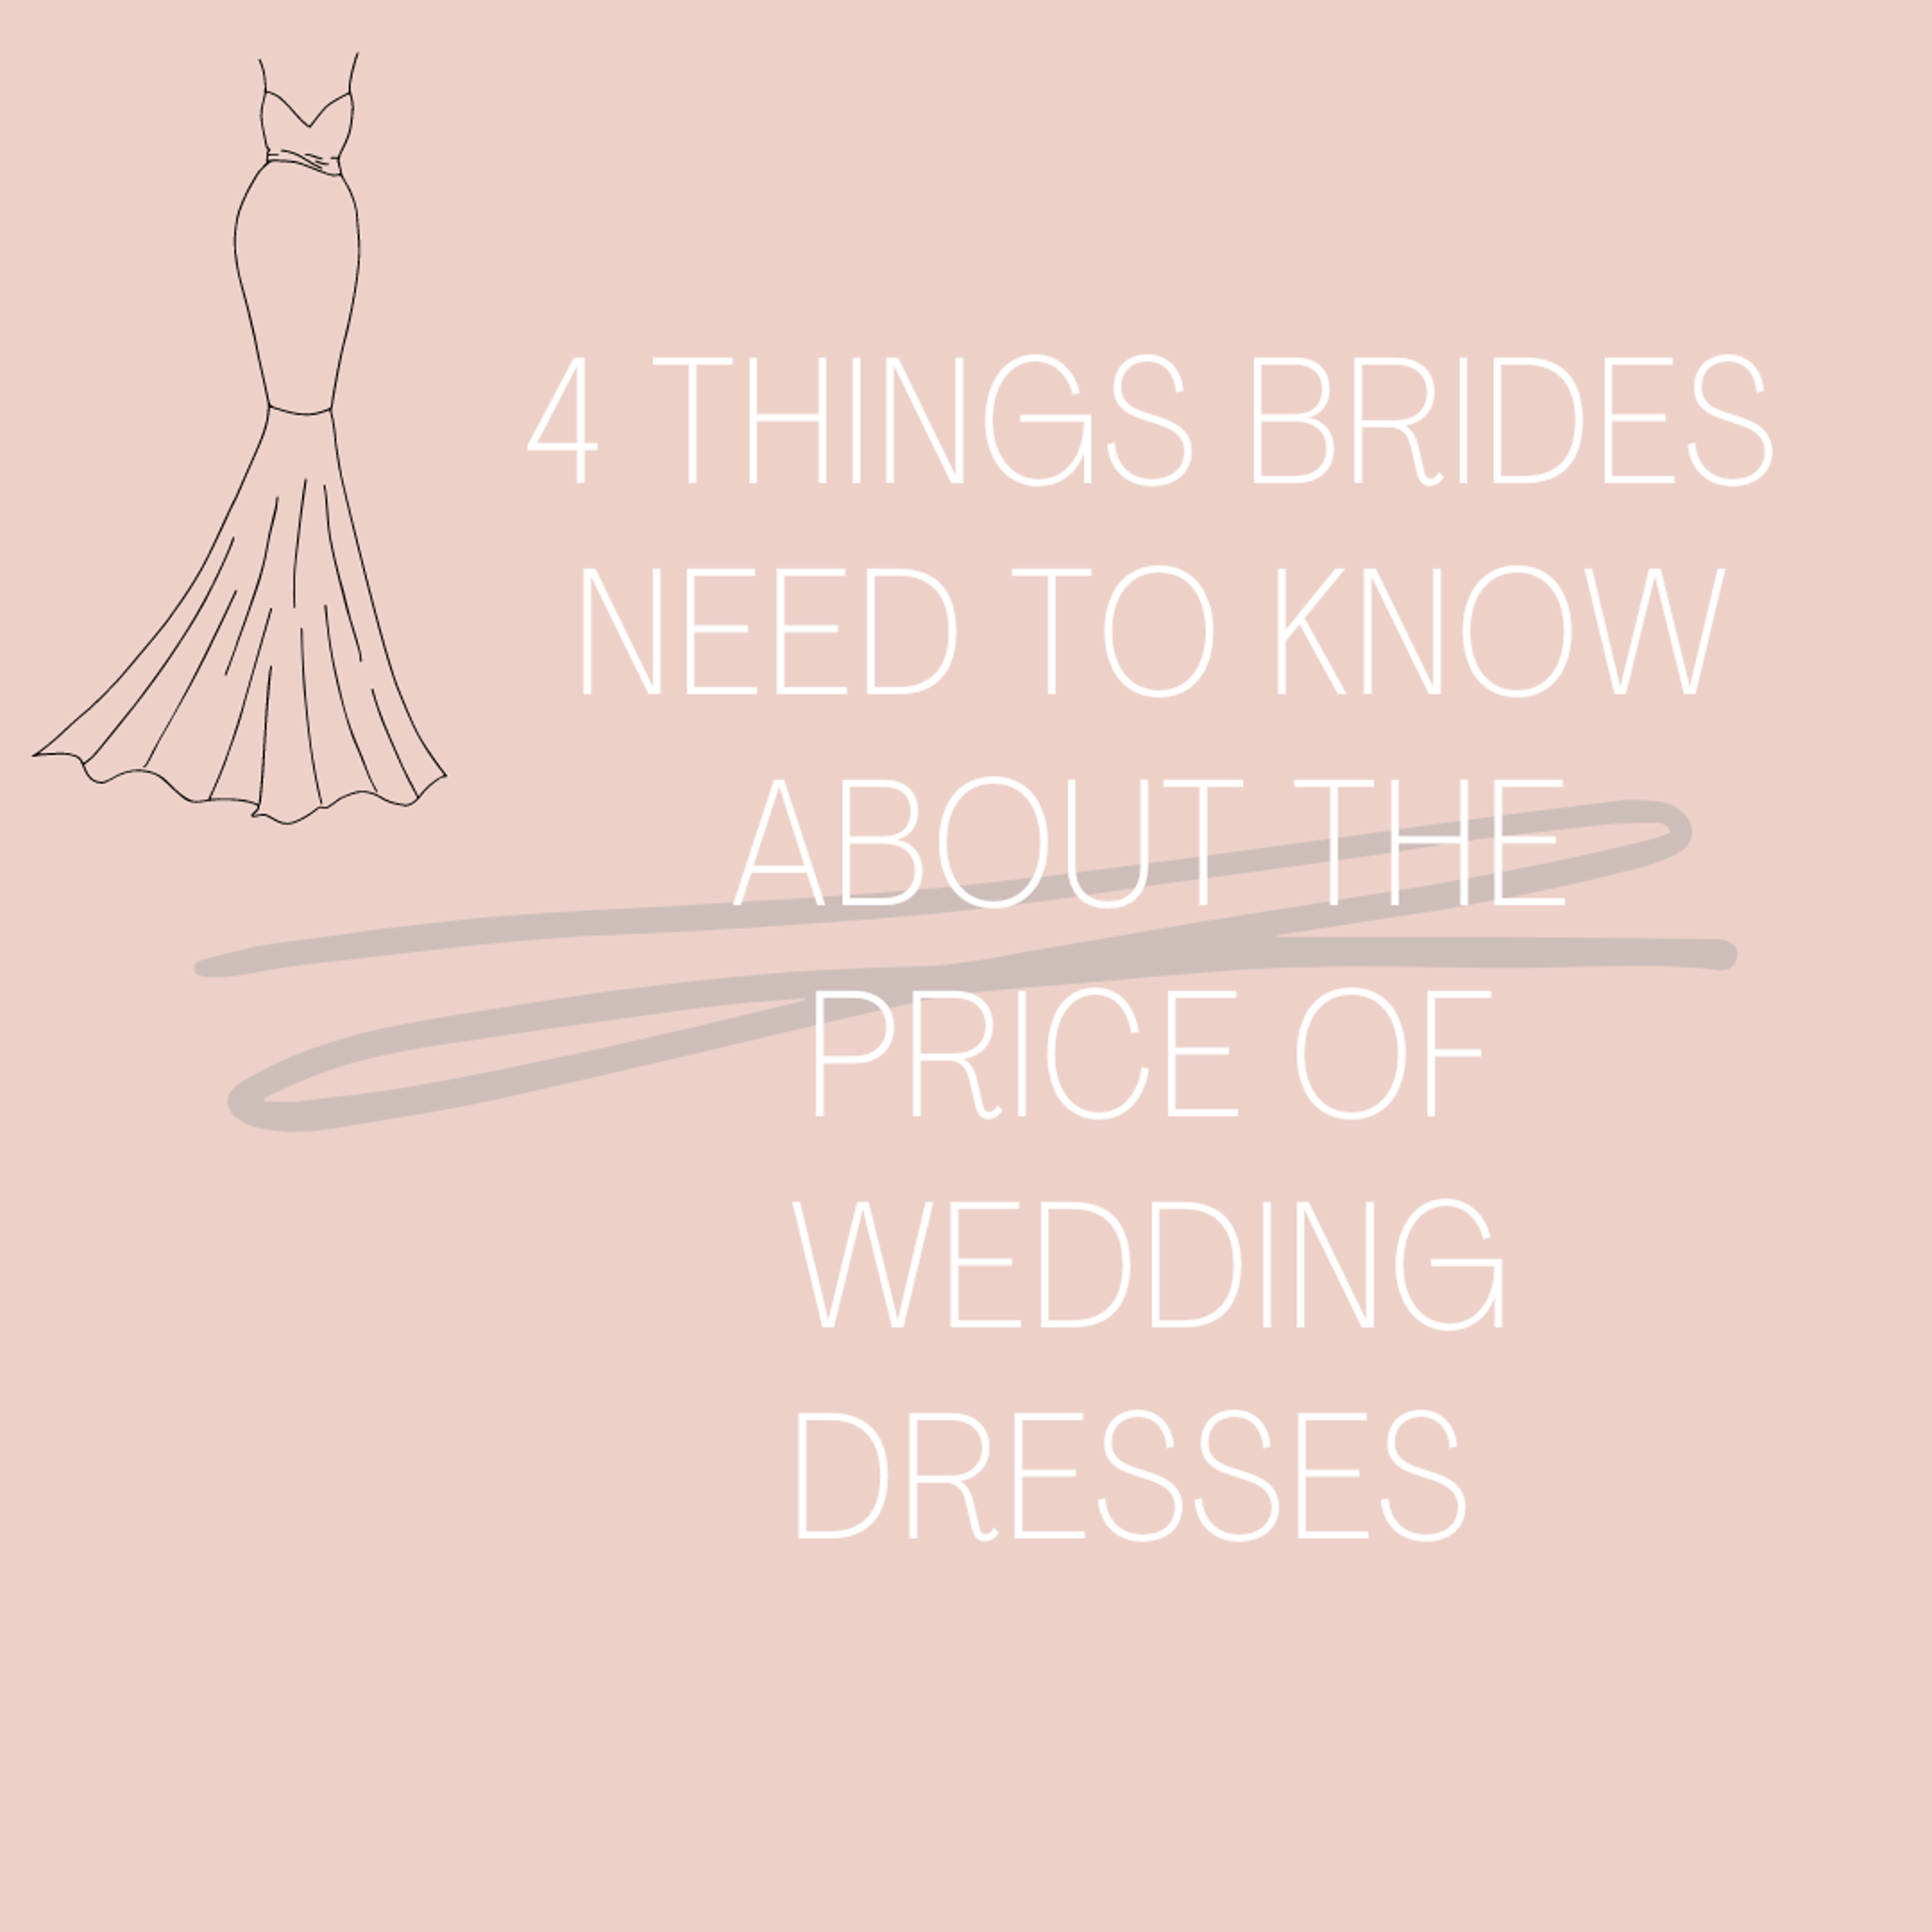 4 Things Brides Need To Know About The Price Of Wedding Dresses. Desktop Image